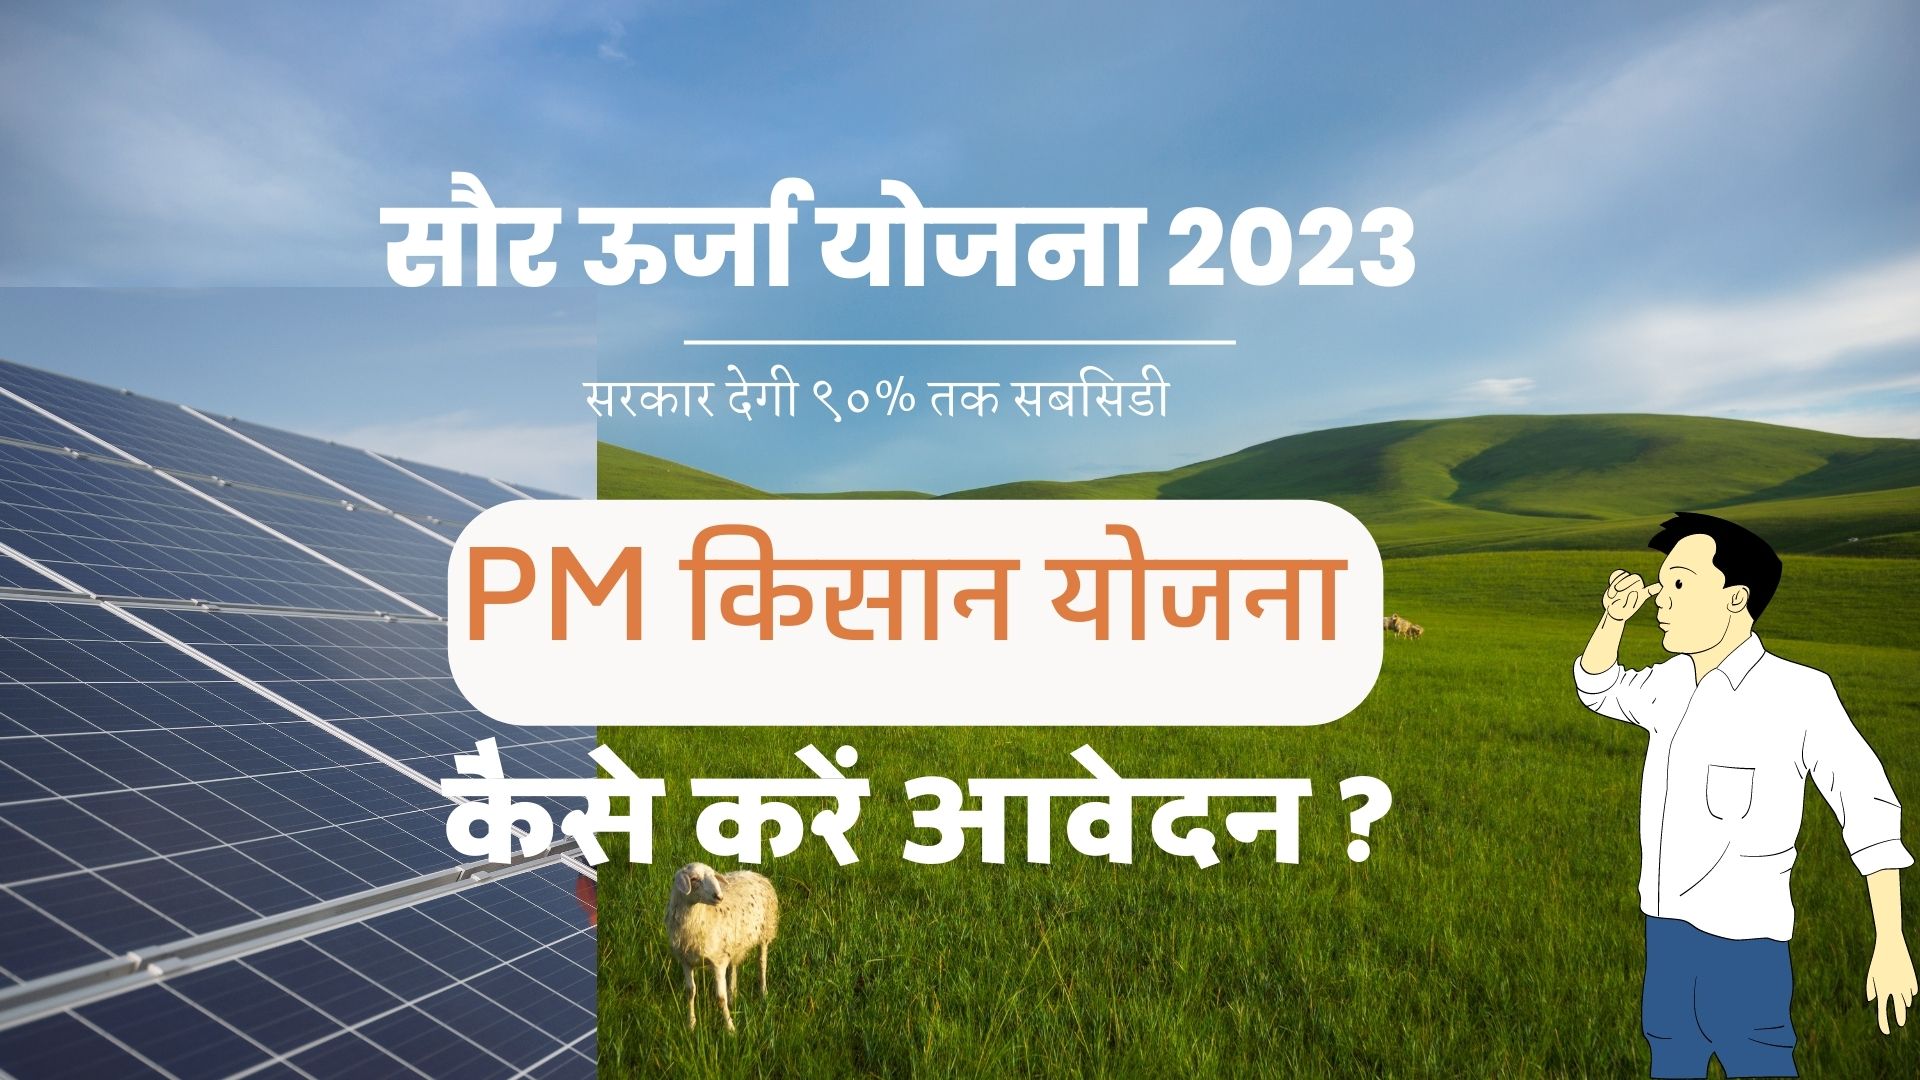 सौर ऊर्जा योजना 2023 :New scheme related to solar energy will get subsidy up to 90% apply soon